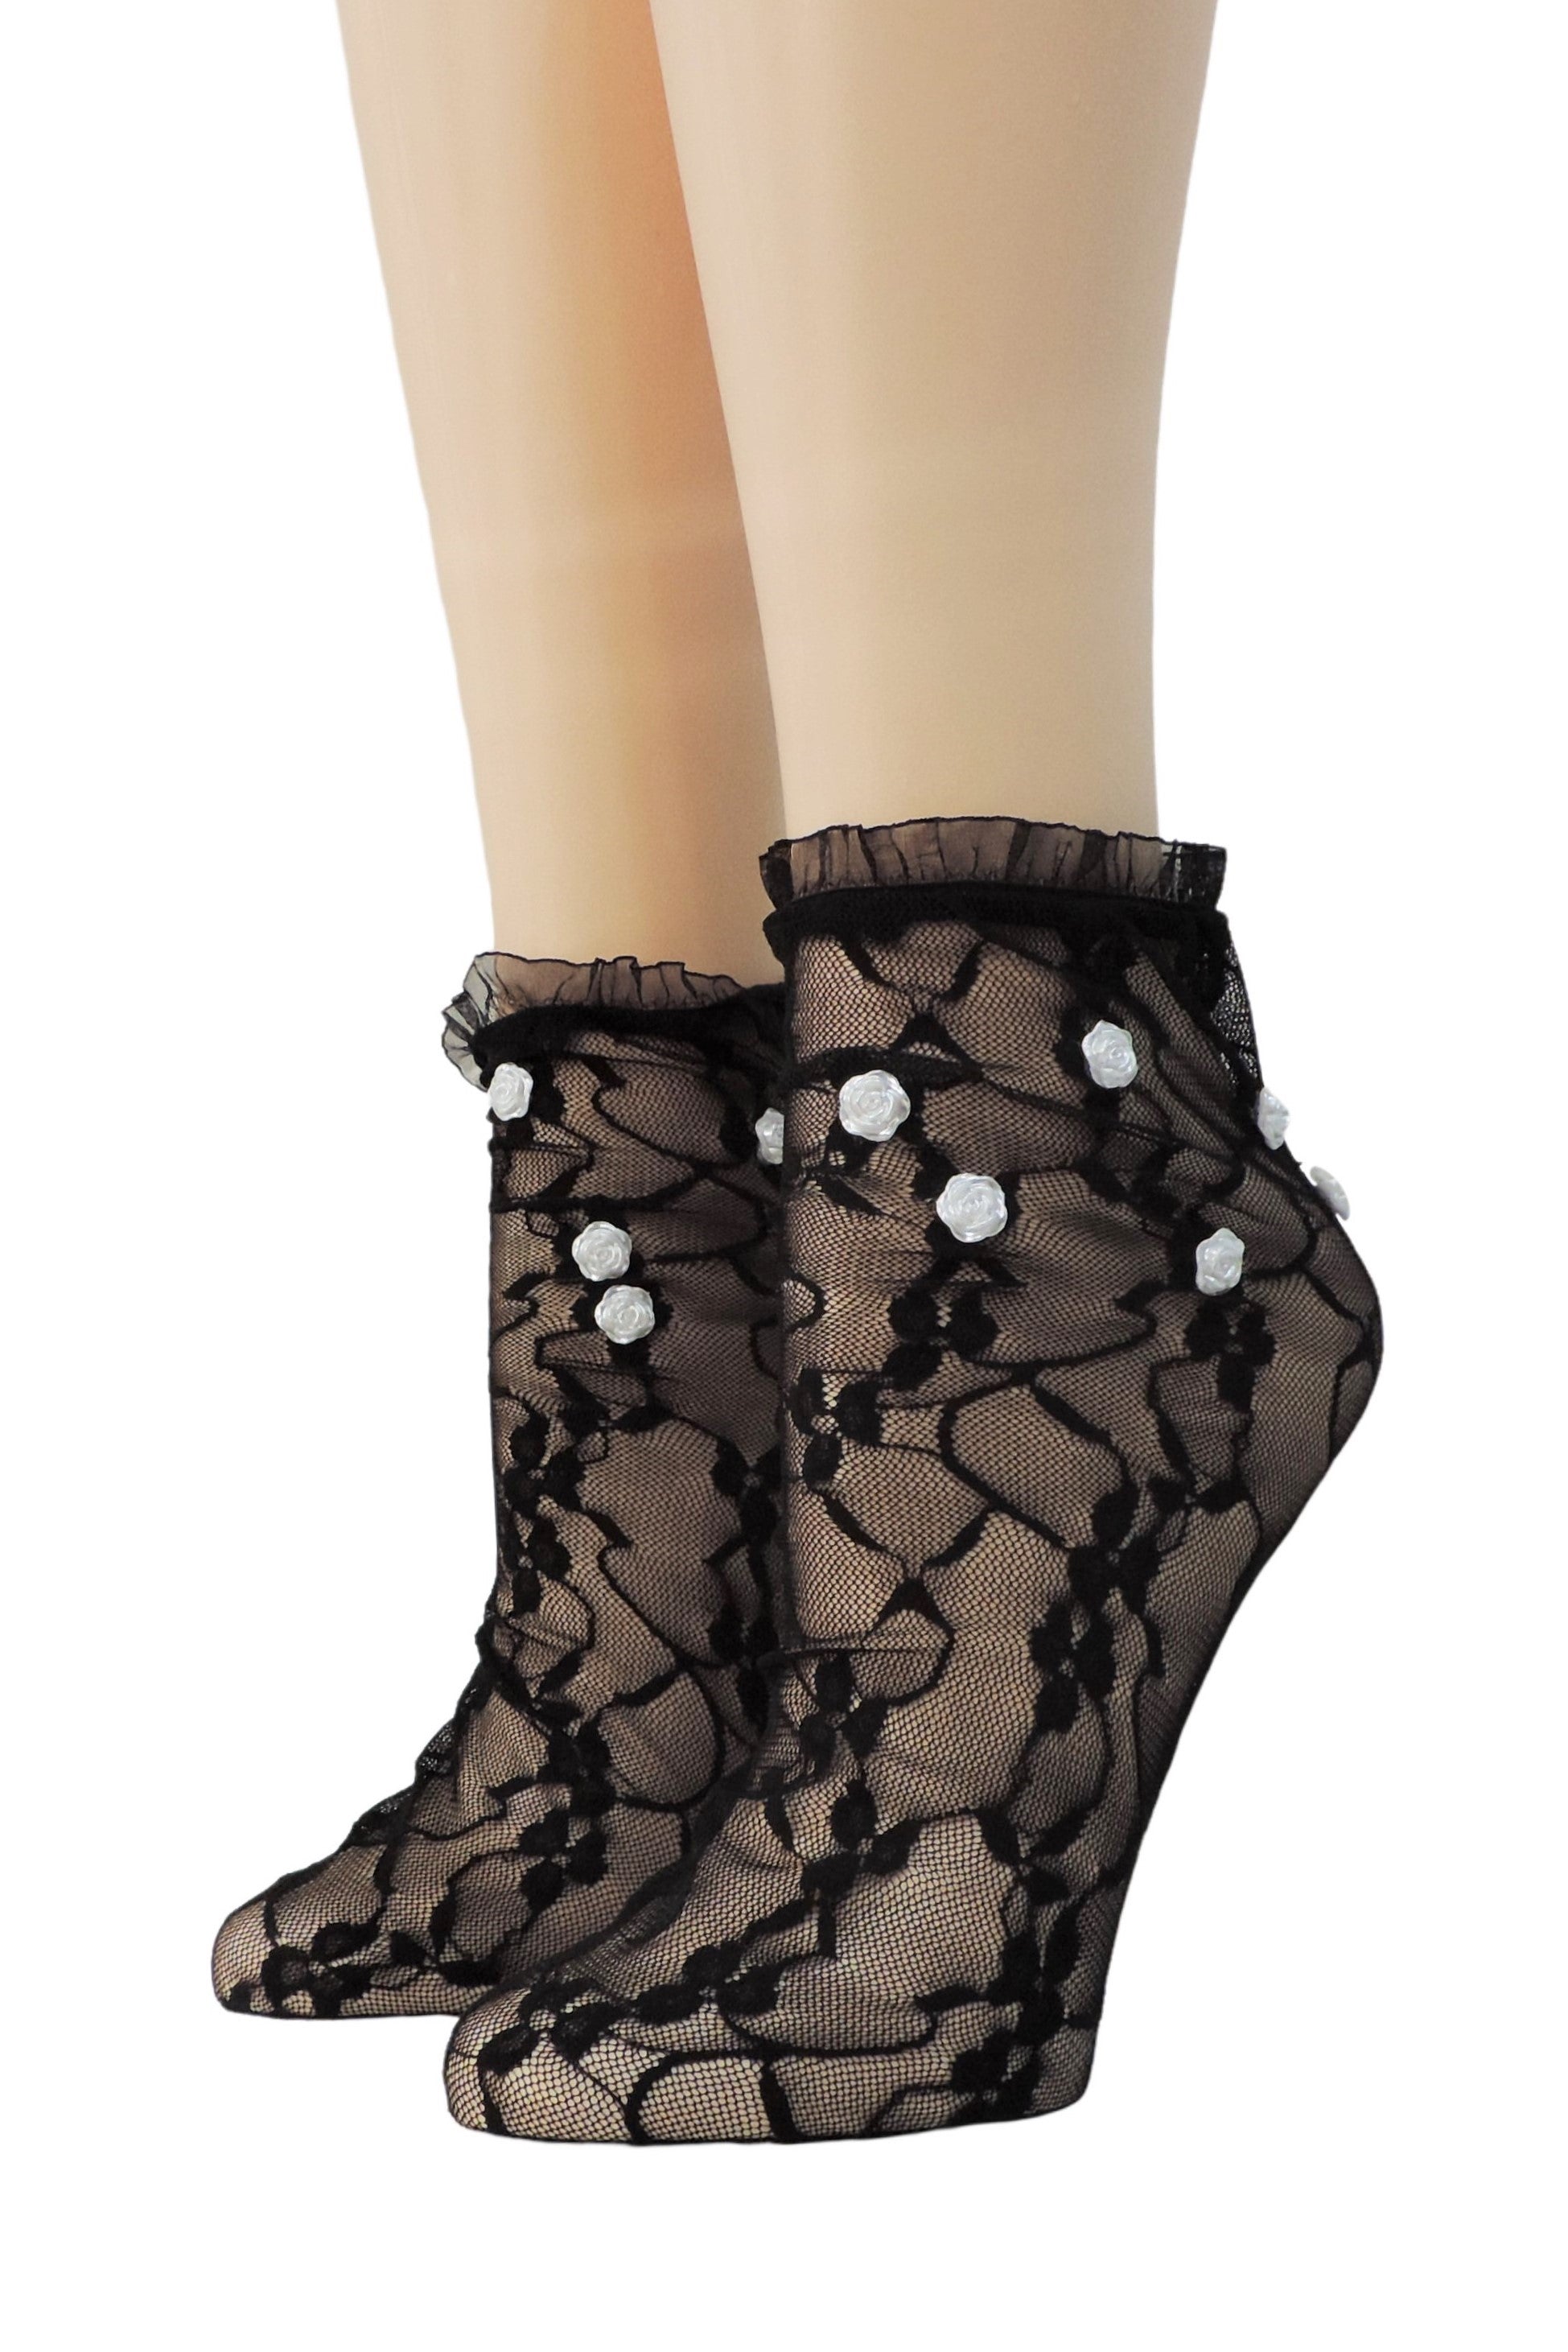 Grease Mesh Socks with frill and beads